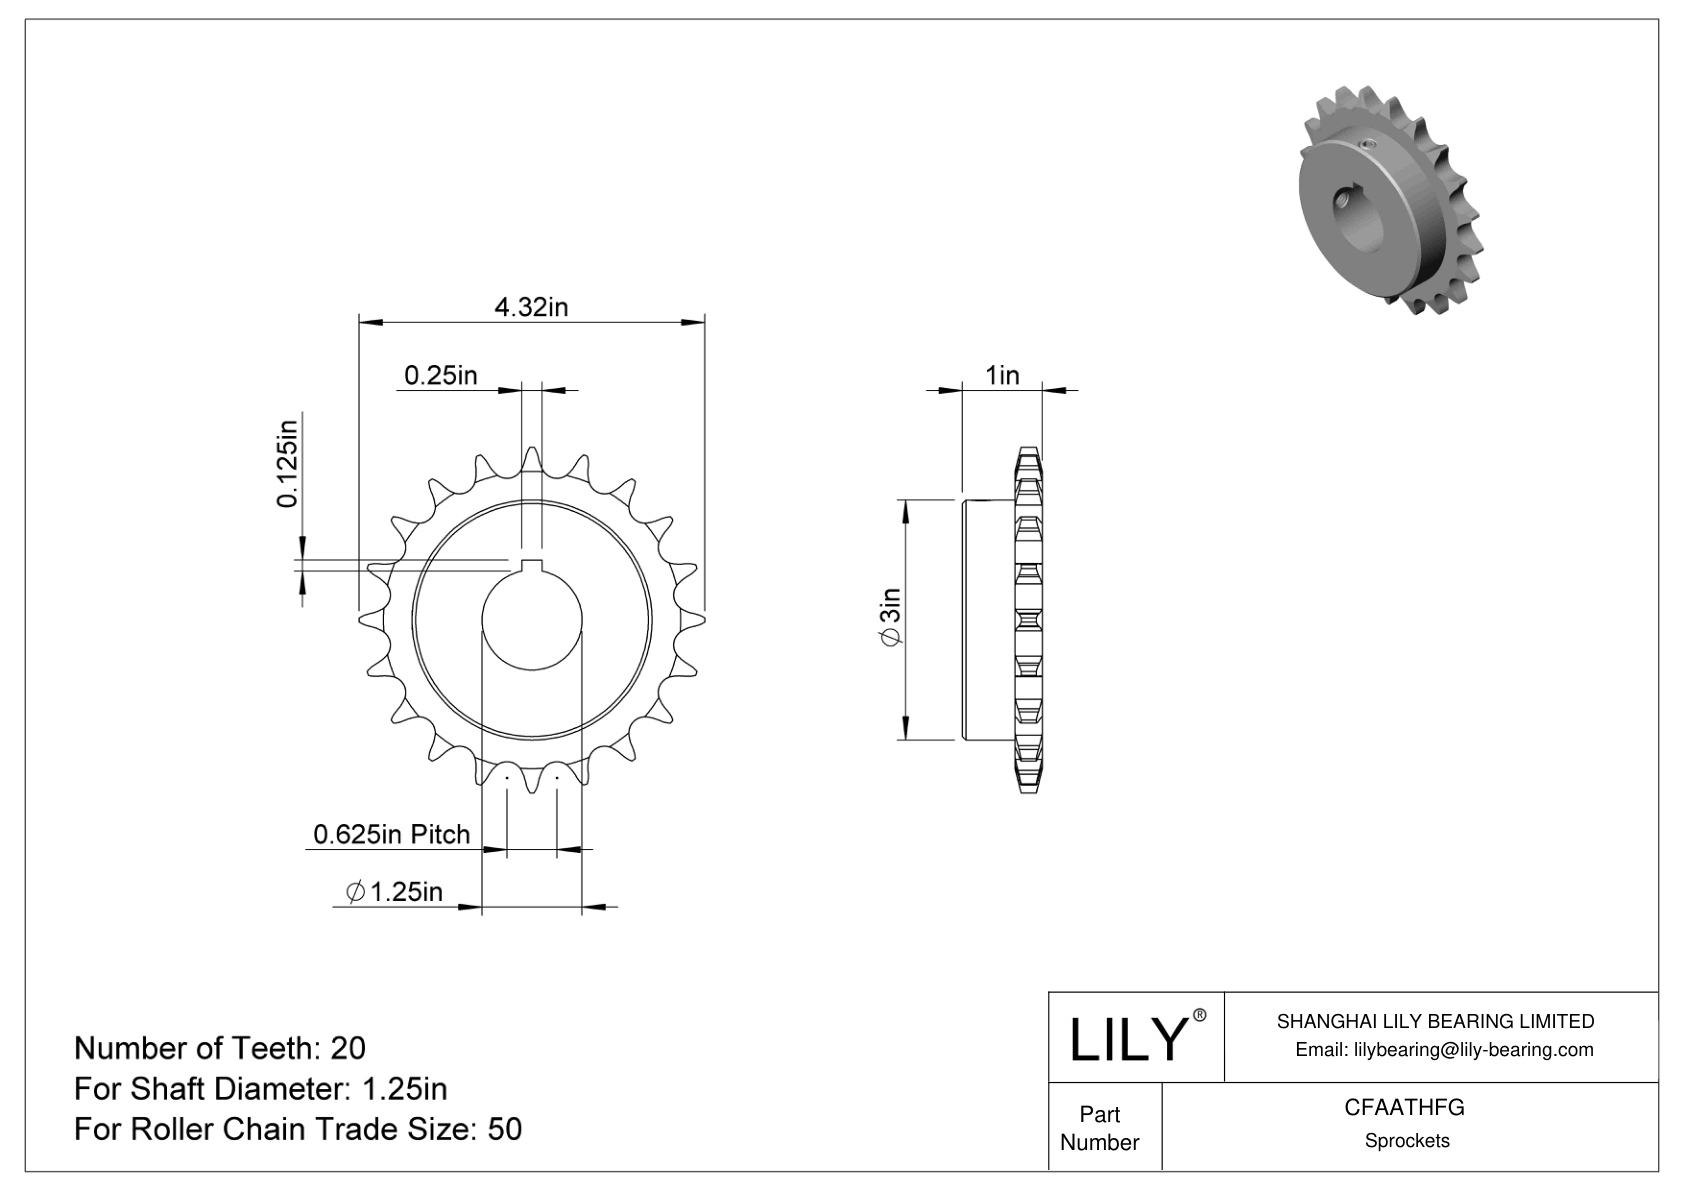 CFAATHFG Wear-Resistant Sprockets for ANSI Roller Chain cad drawing